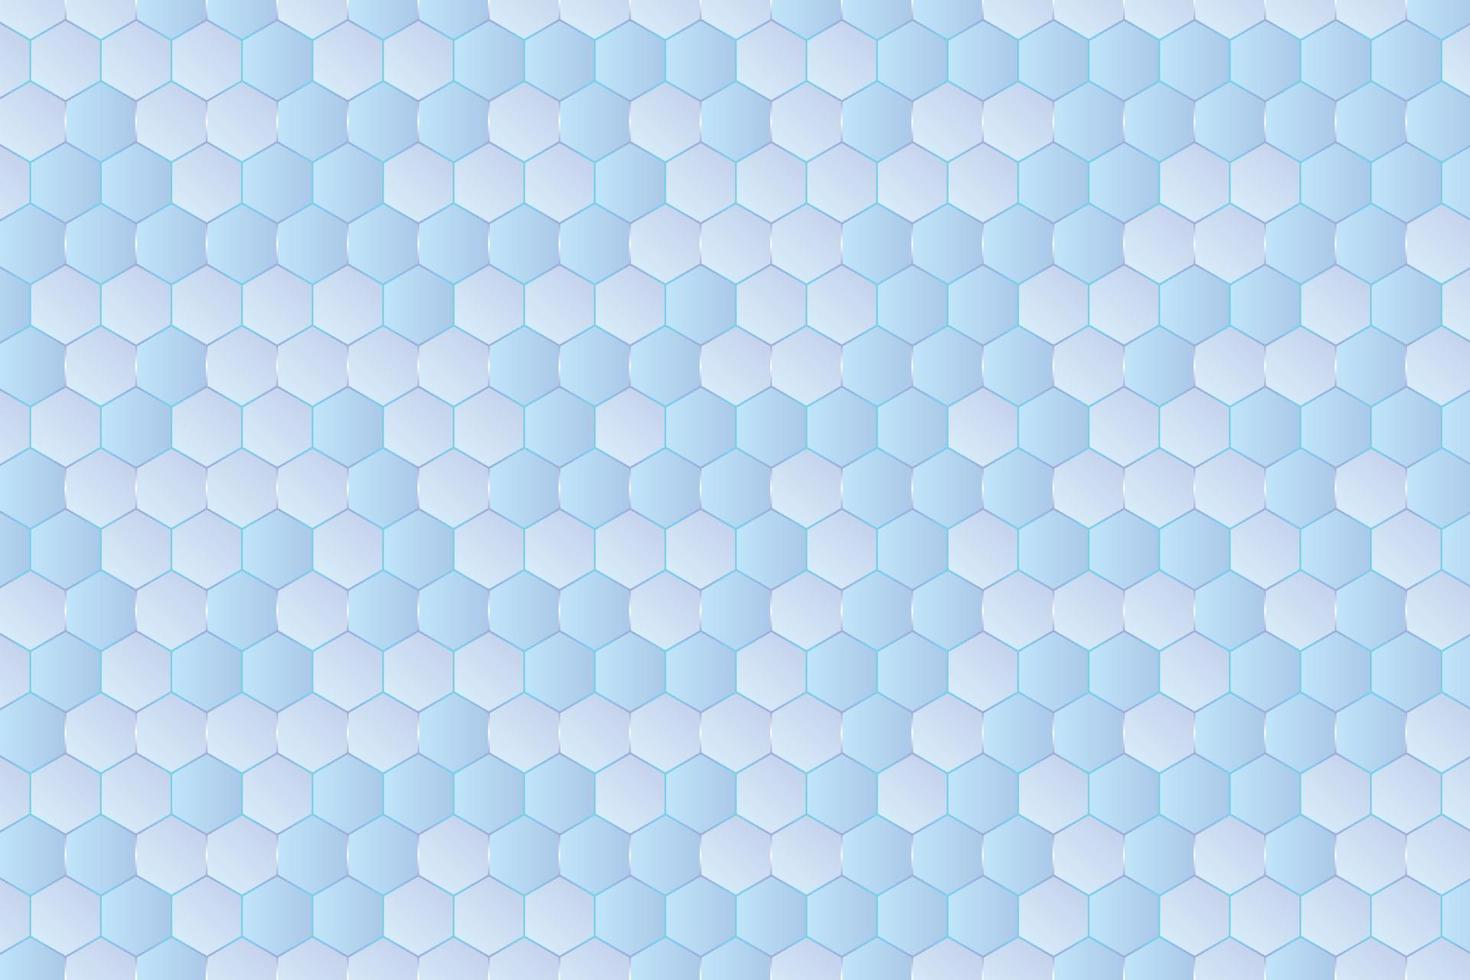 Abstract minimalist navy blue gradient wallpaper with hexagon grid. Honeycomb cells with geometric mosaic background illustration vector